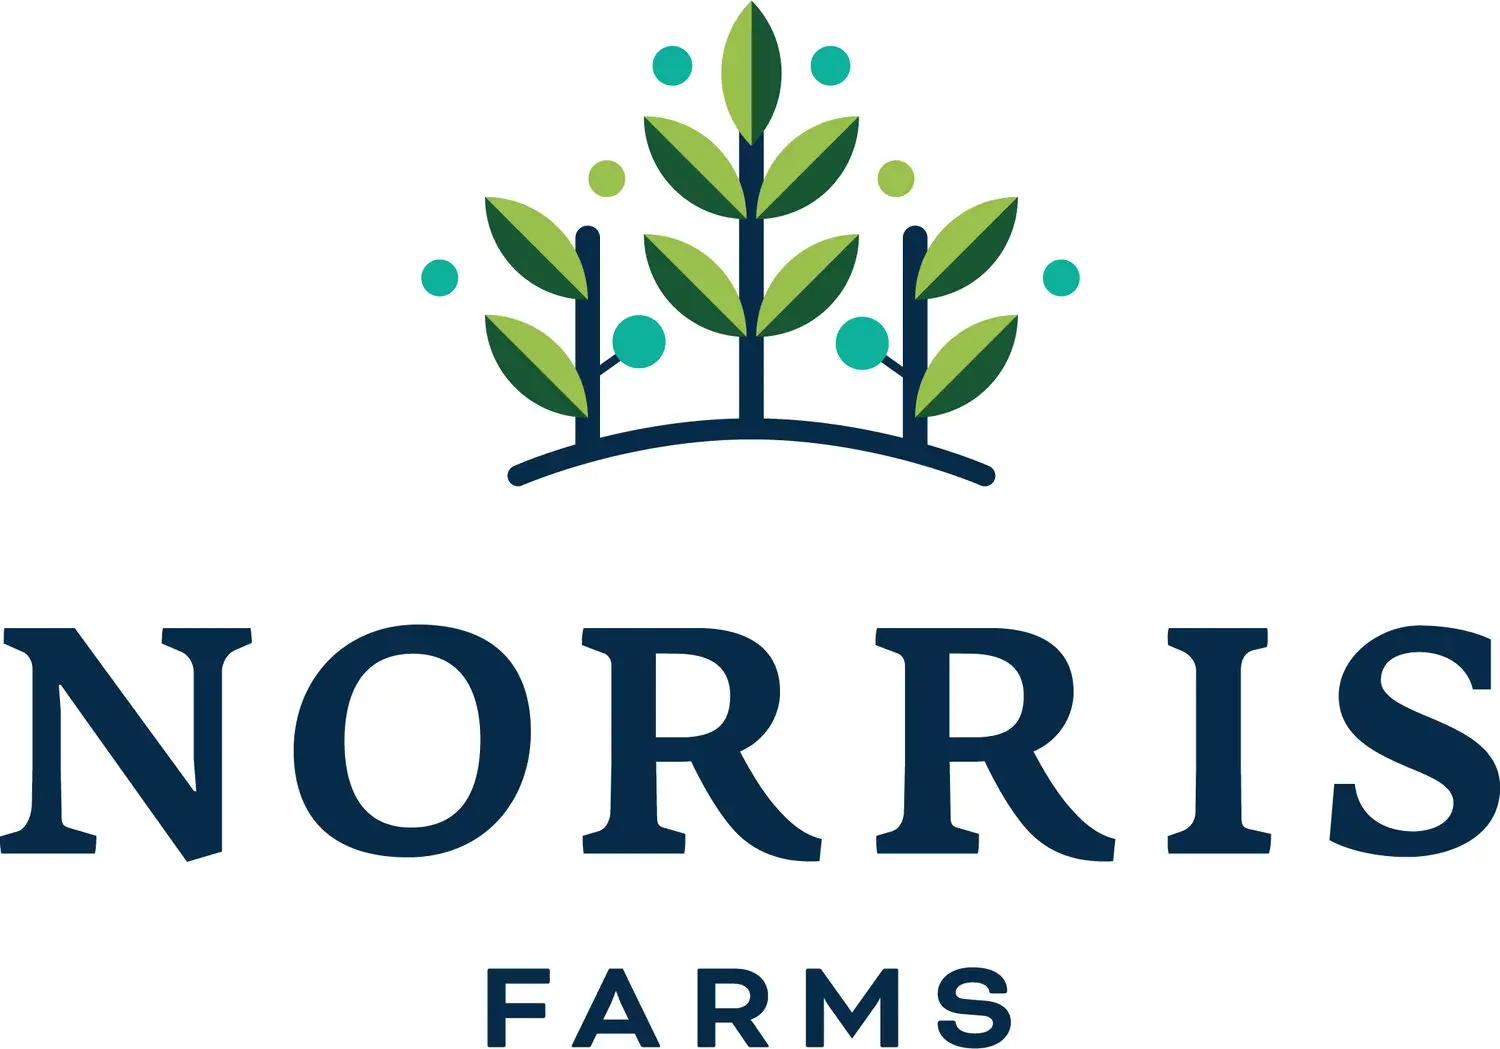 Business logo of Norris Blueberry Farms